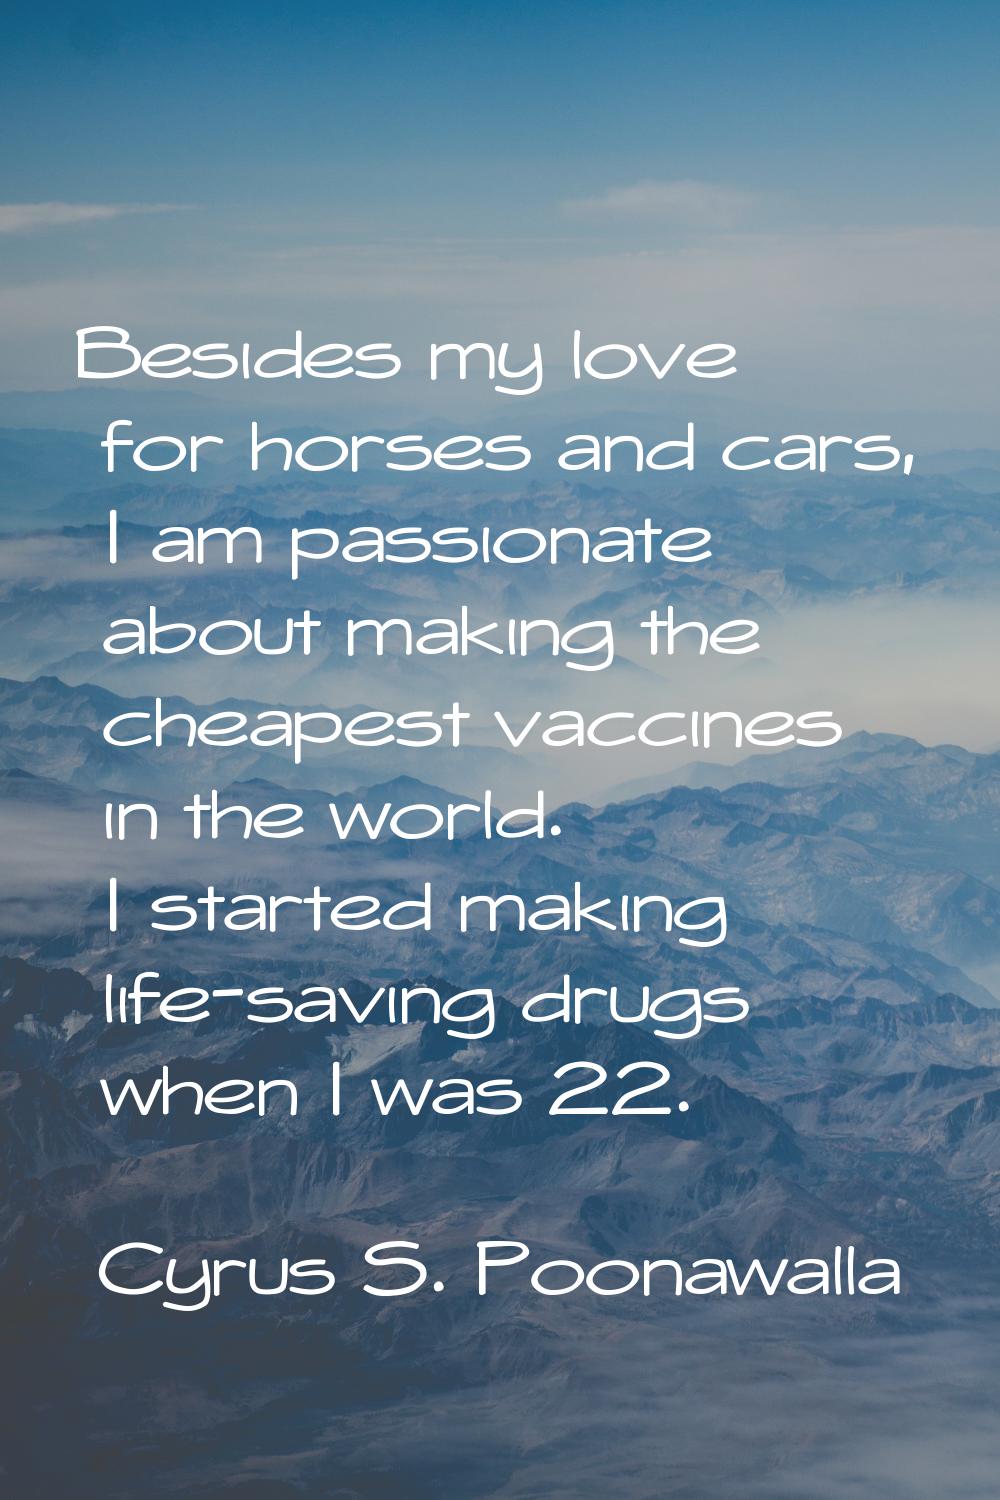 Besides my love for horses and cars, I am passionate about making the cheapest vaccines in the worl